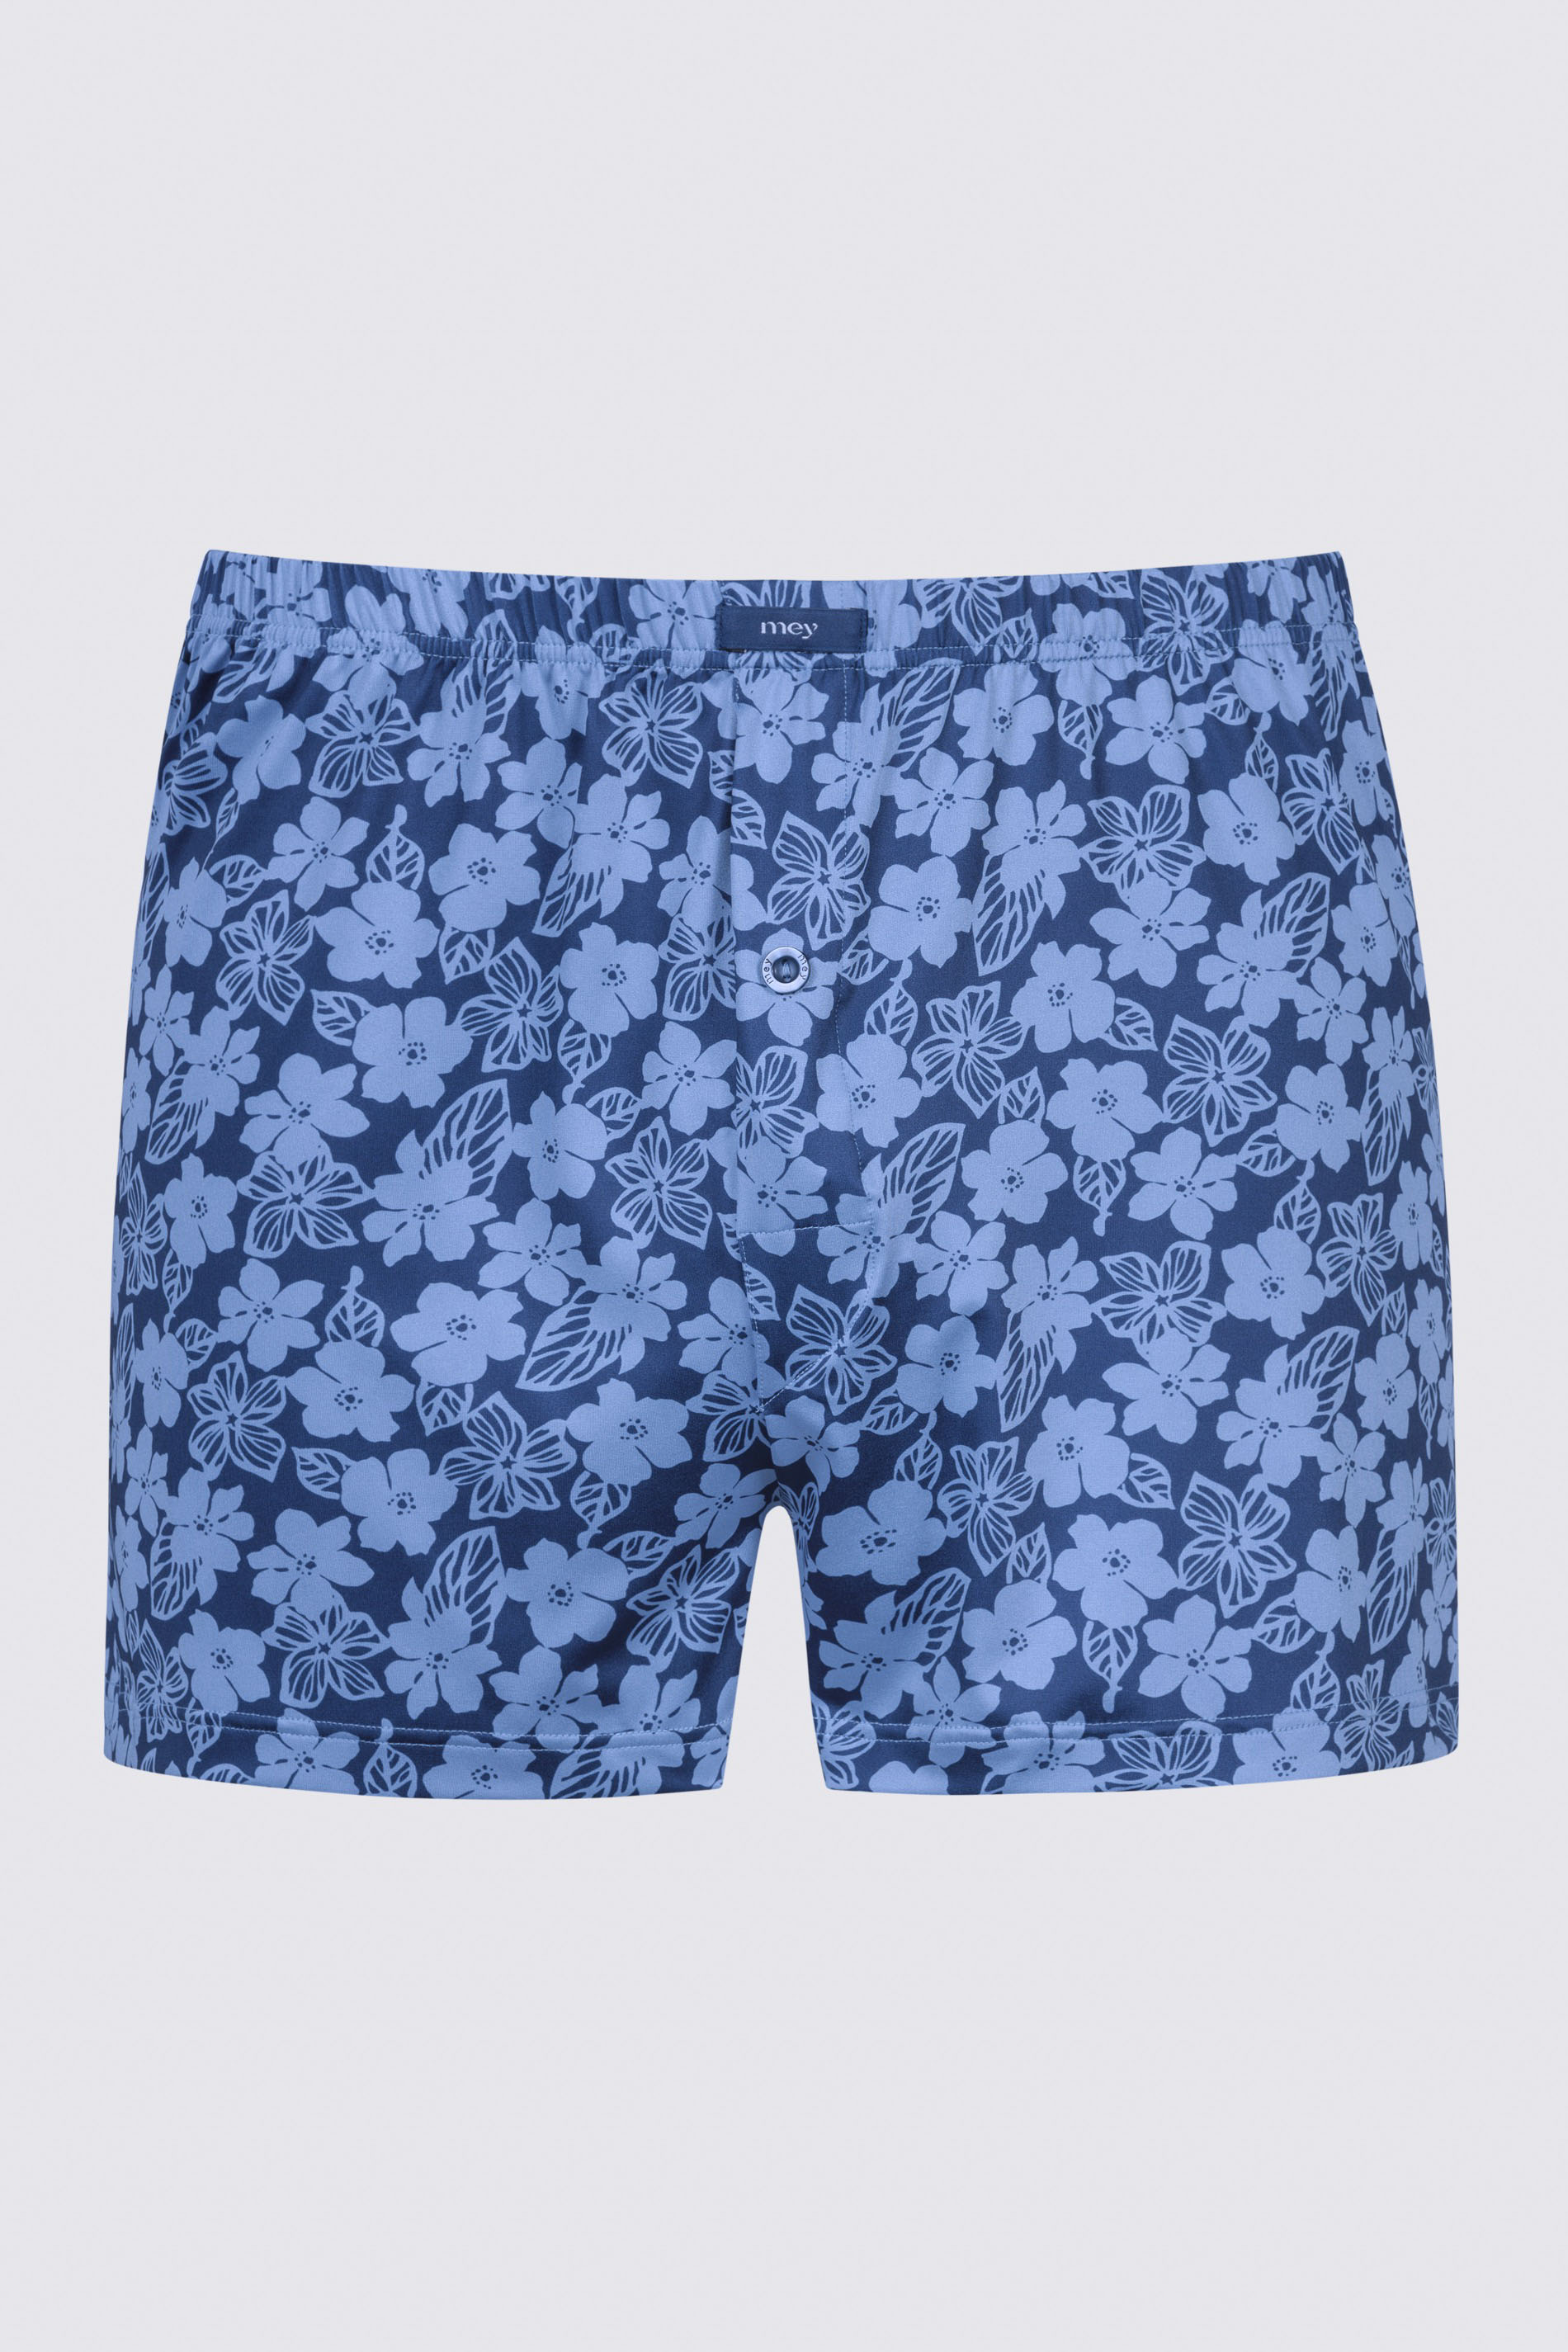 Boxershorts Serie Flowers Uitknippen | mey®